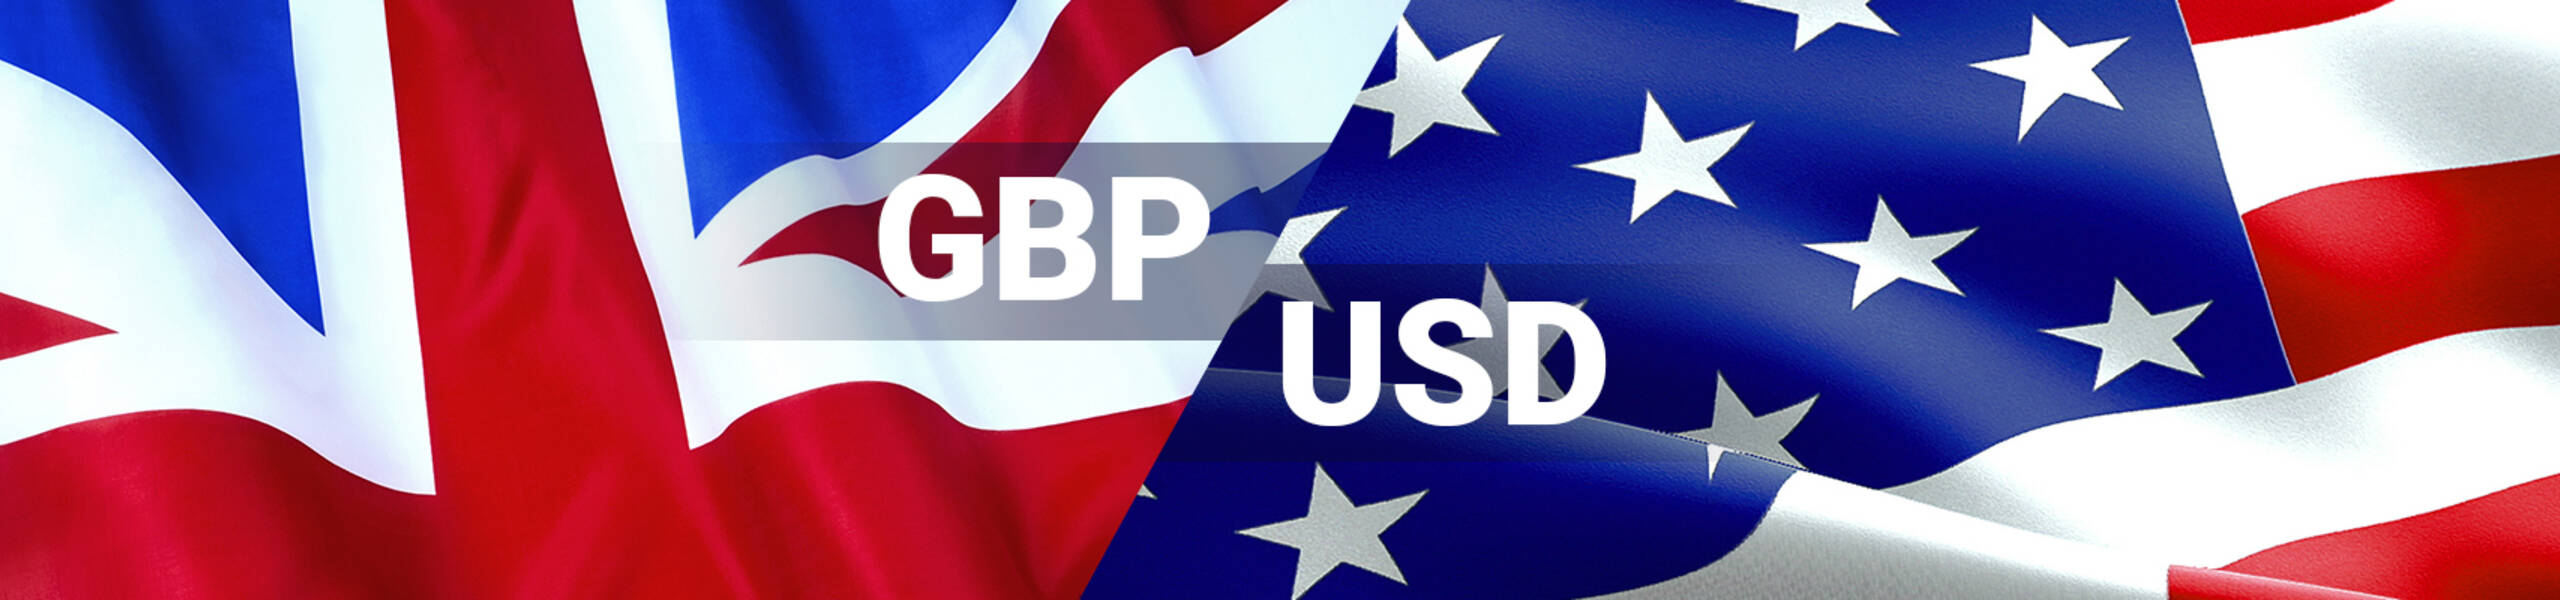 GBP/USD reached buy target - 1.3100